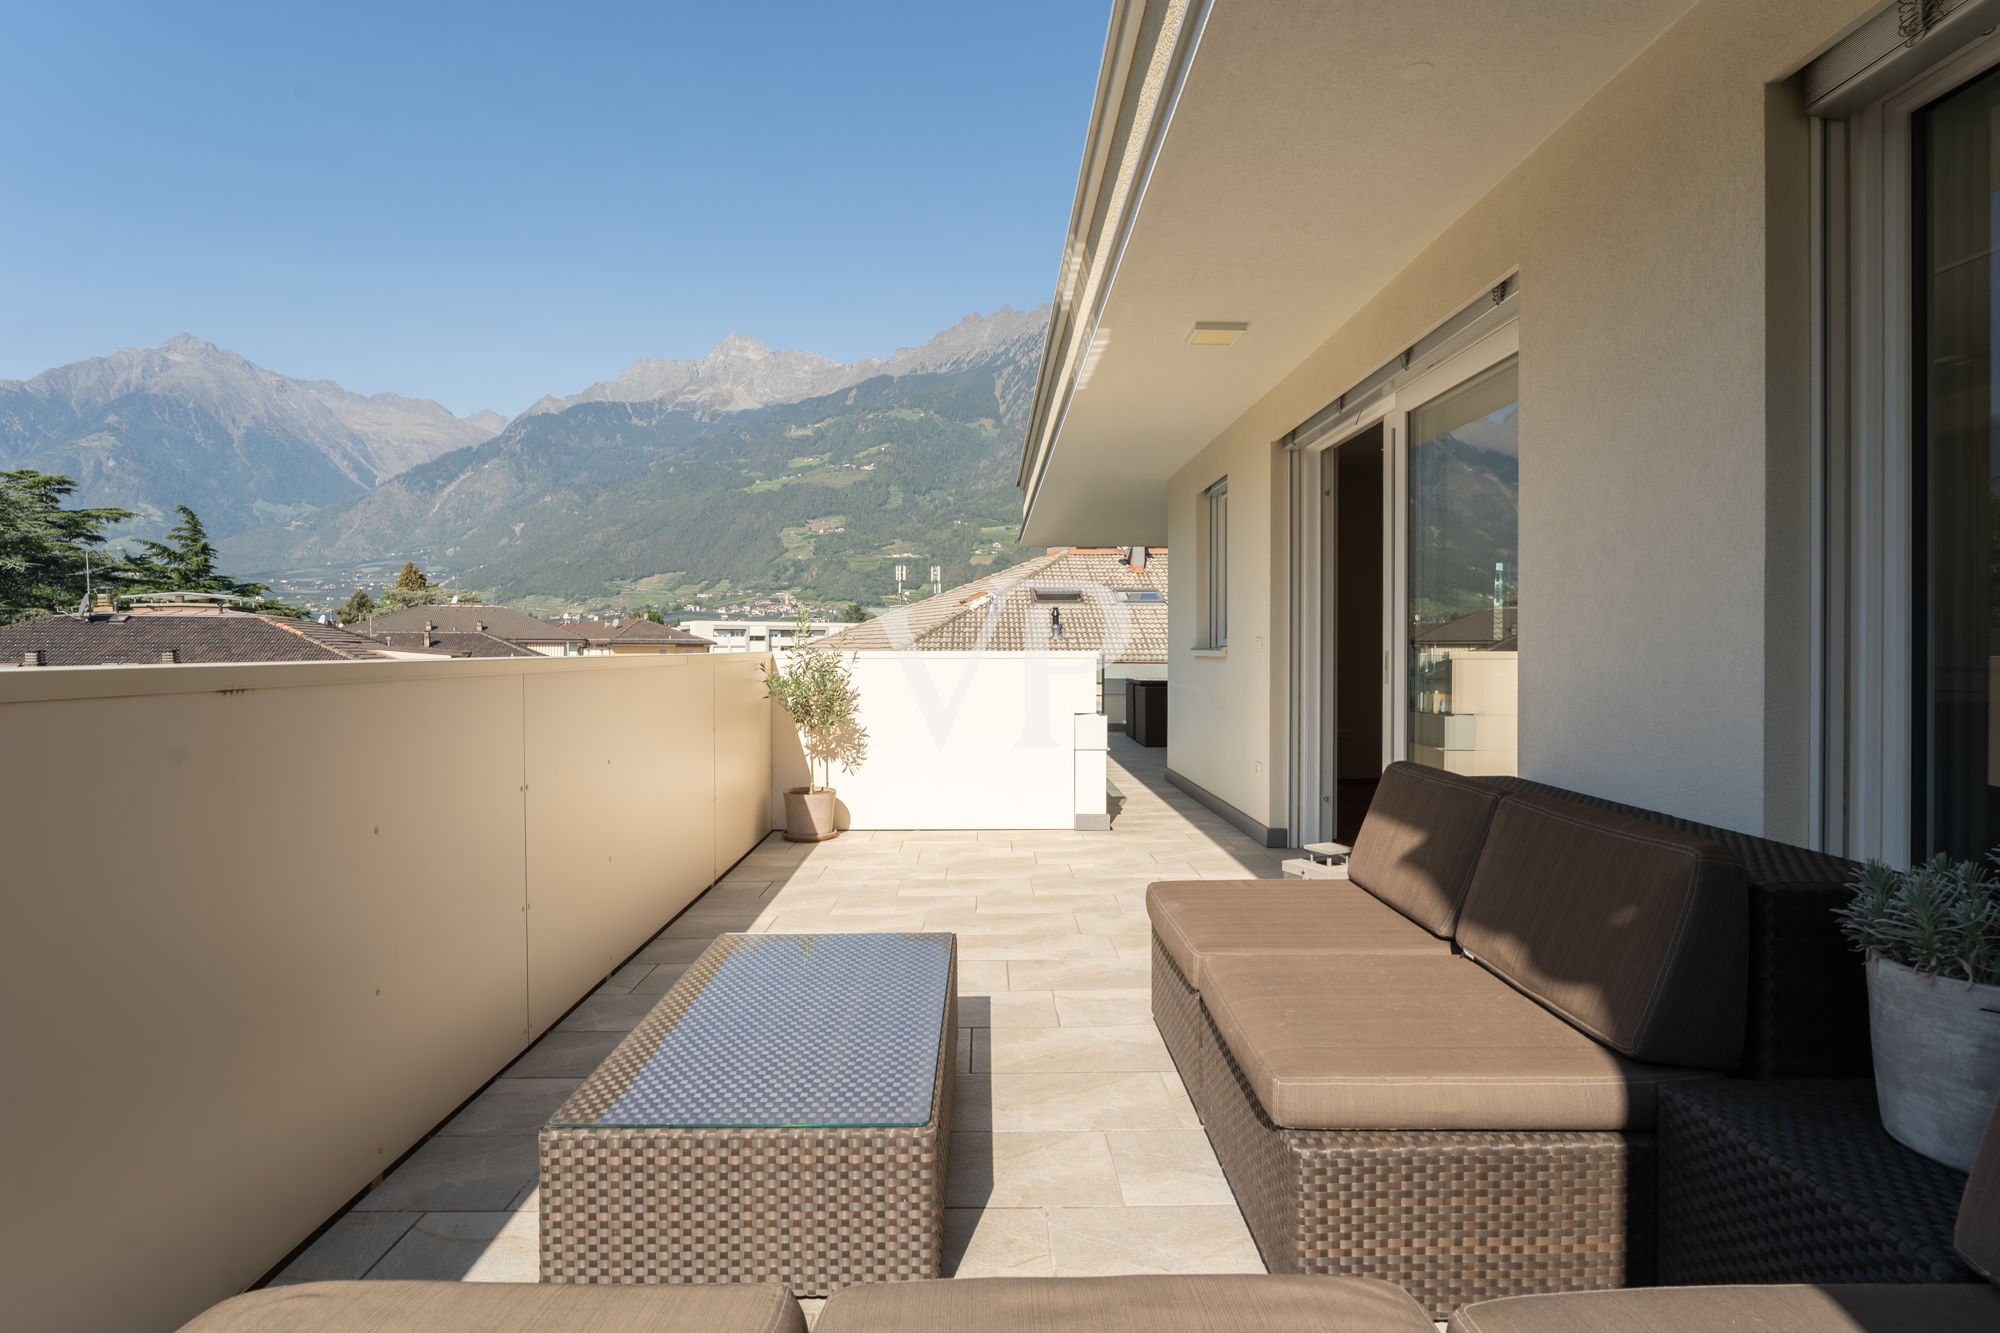 Modern apartment with a magnificent view of the Merano mountains